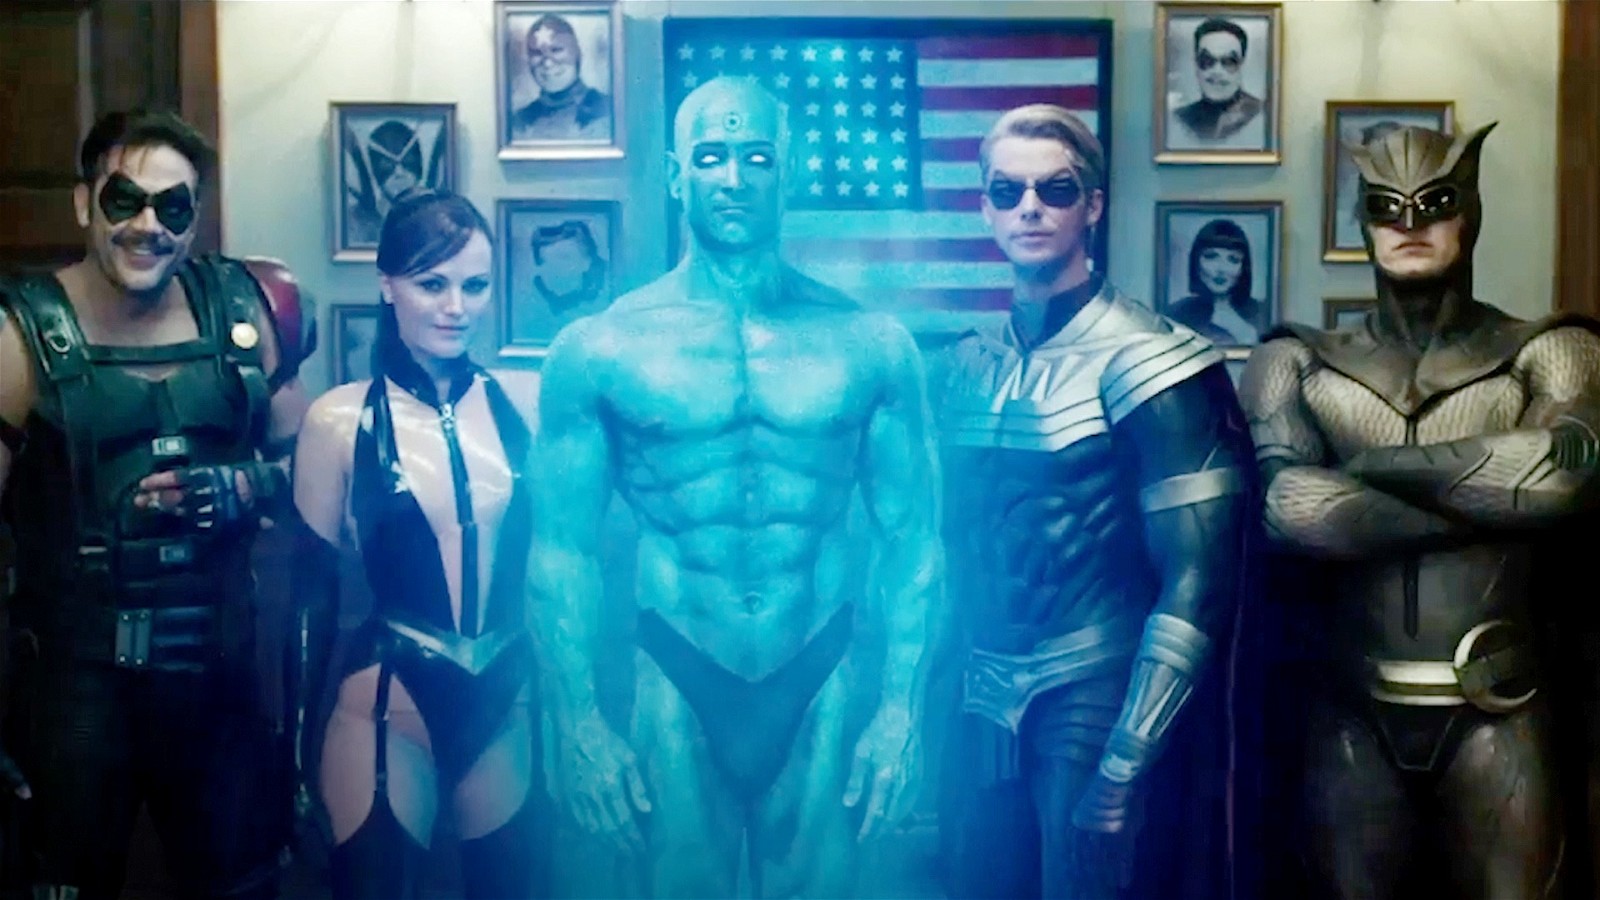 A still from the Zack Snyder Watchmen movie featuring its full cast in costume